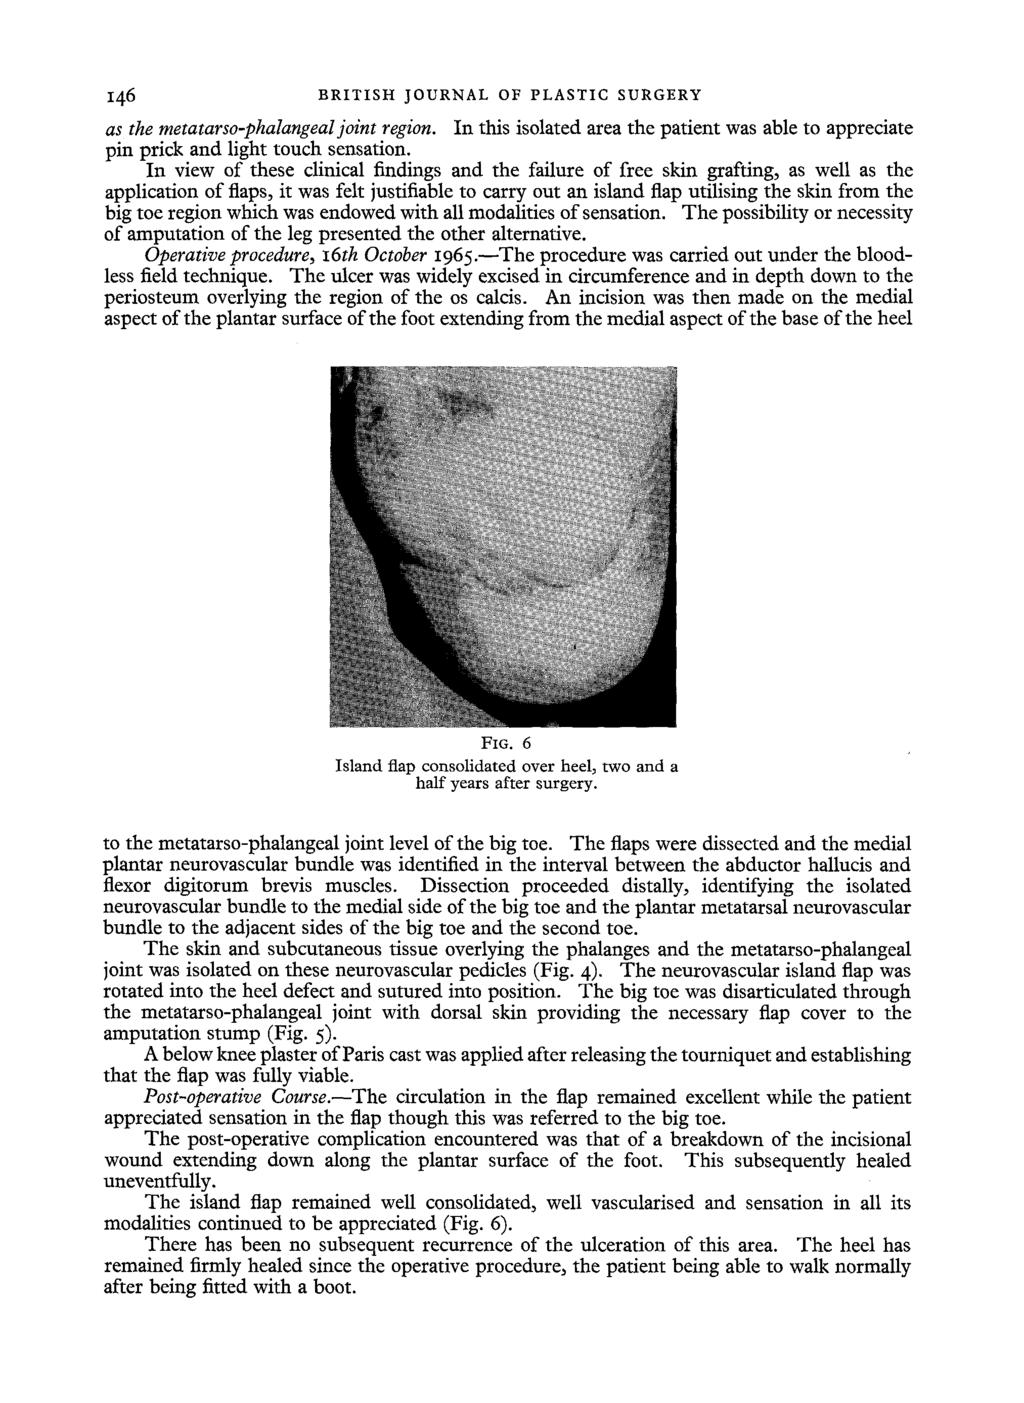 146 BRITISH JOURNAL OF PLASTIC SURGERY as the metatarso-phalangealjoint region. In this isolated area the patient was able to appreciate pin prick and light touch sensation.